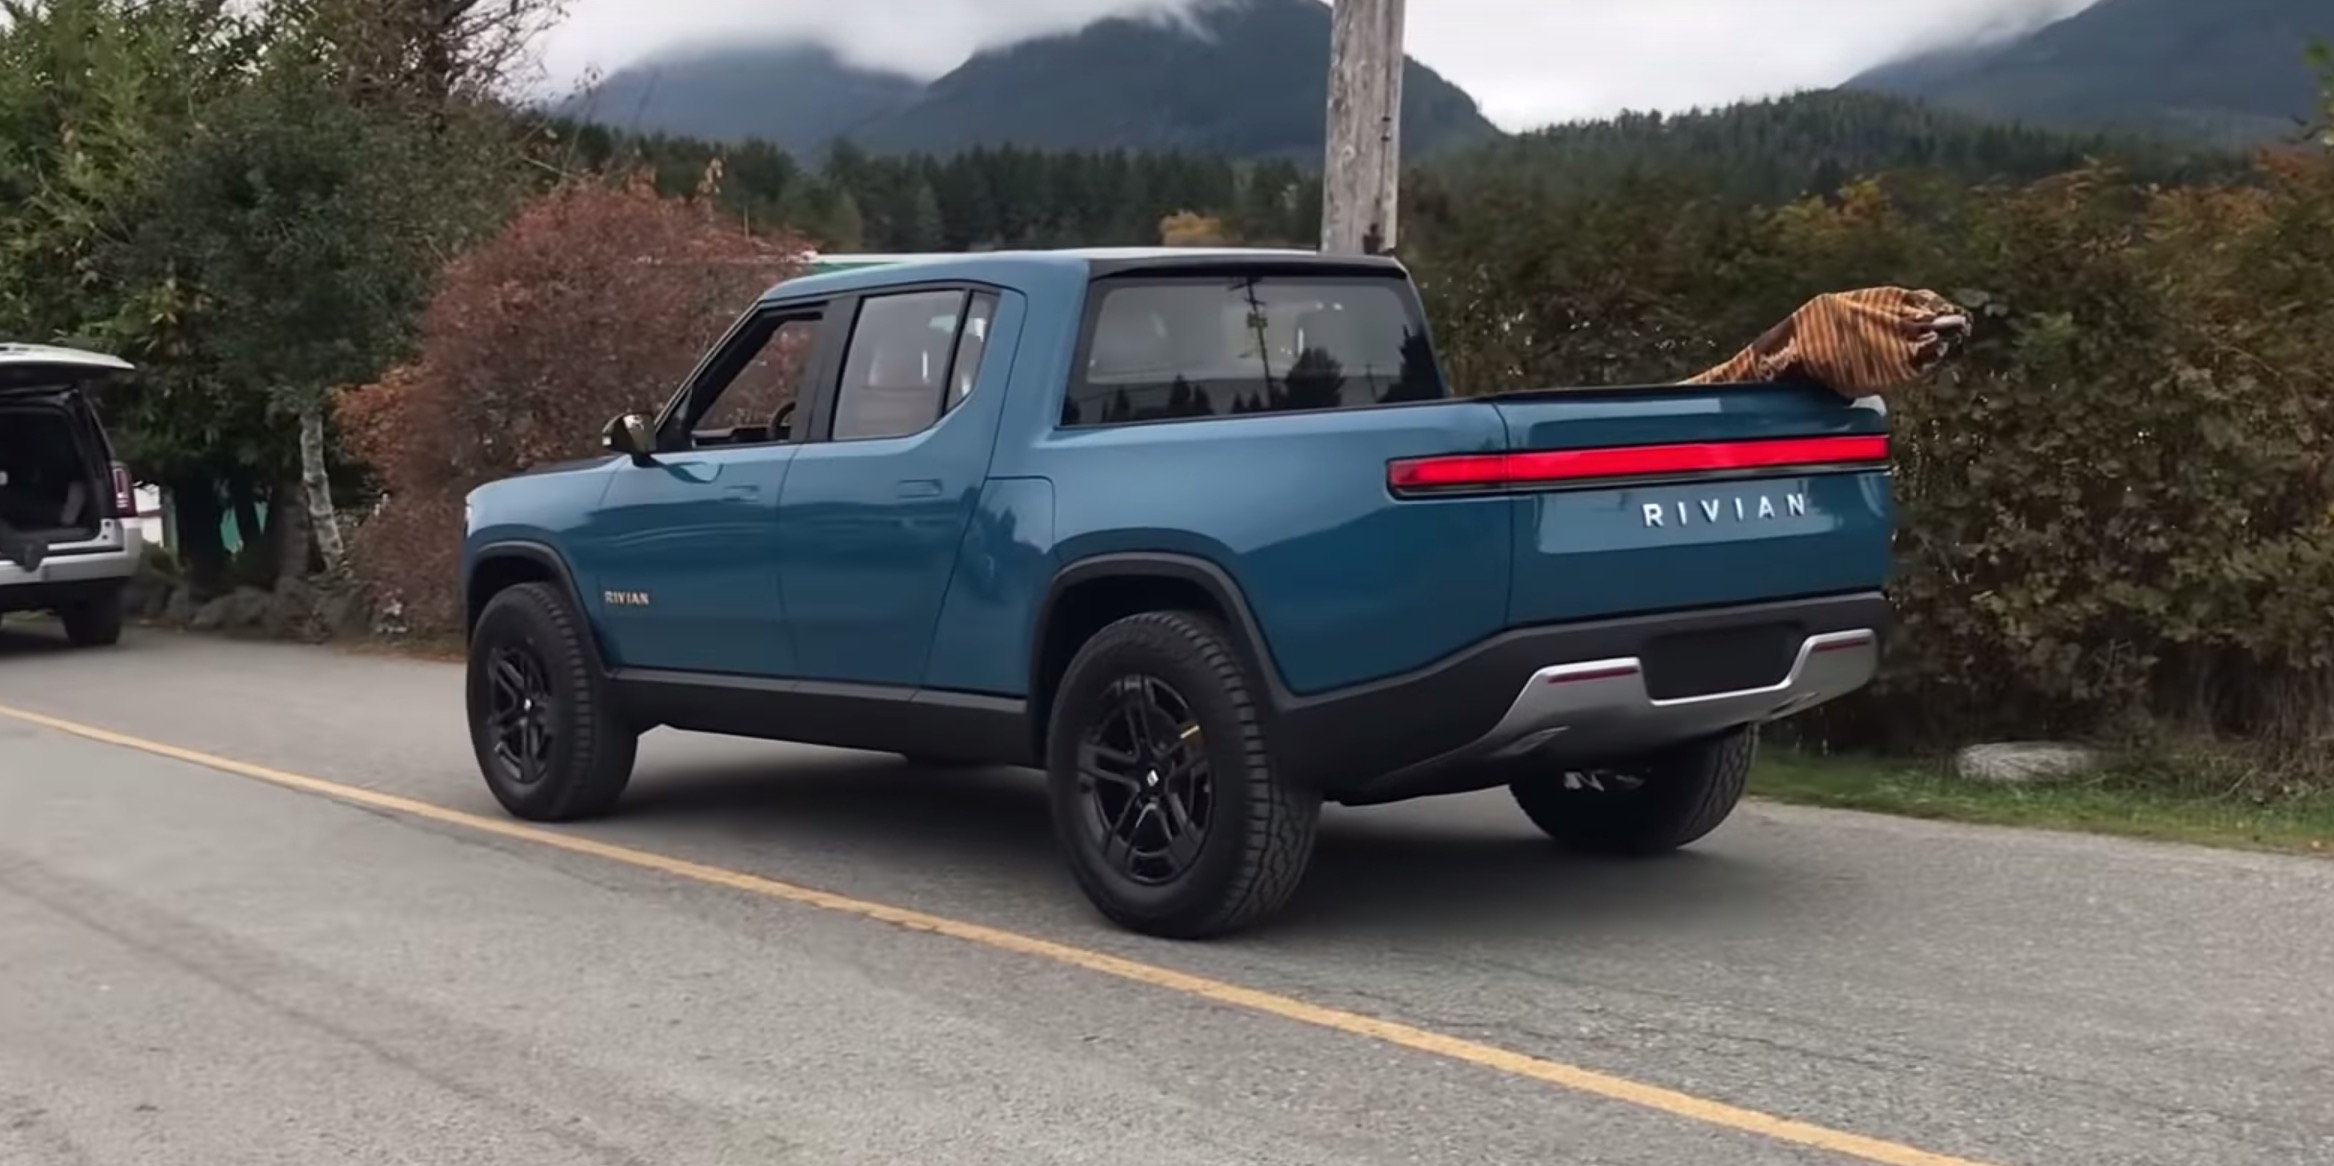 Watch Latest Rivian R1t Electric Pickup Prototype Spotted Driving In Canada Electrek 3735